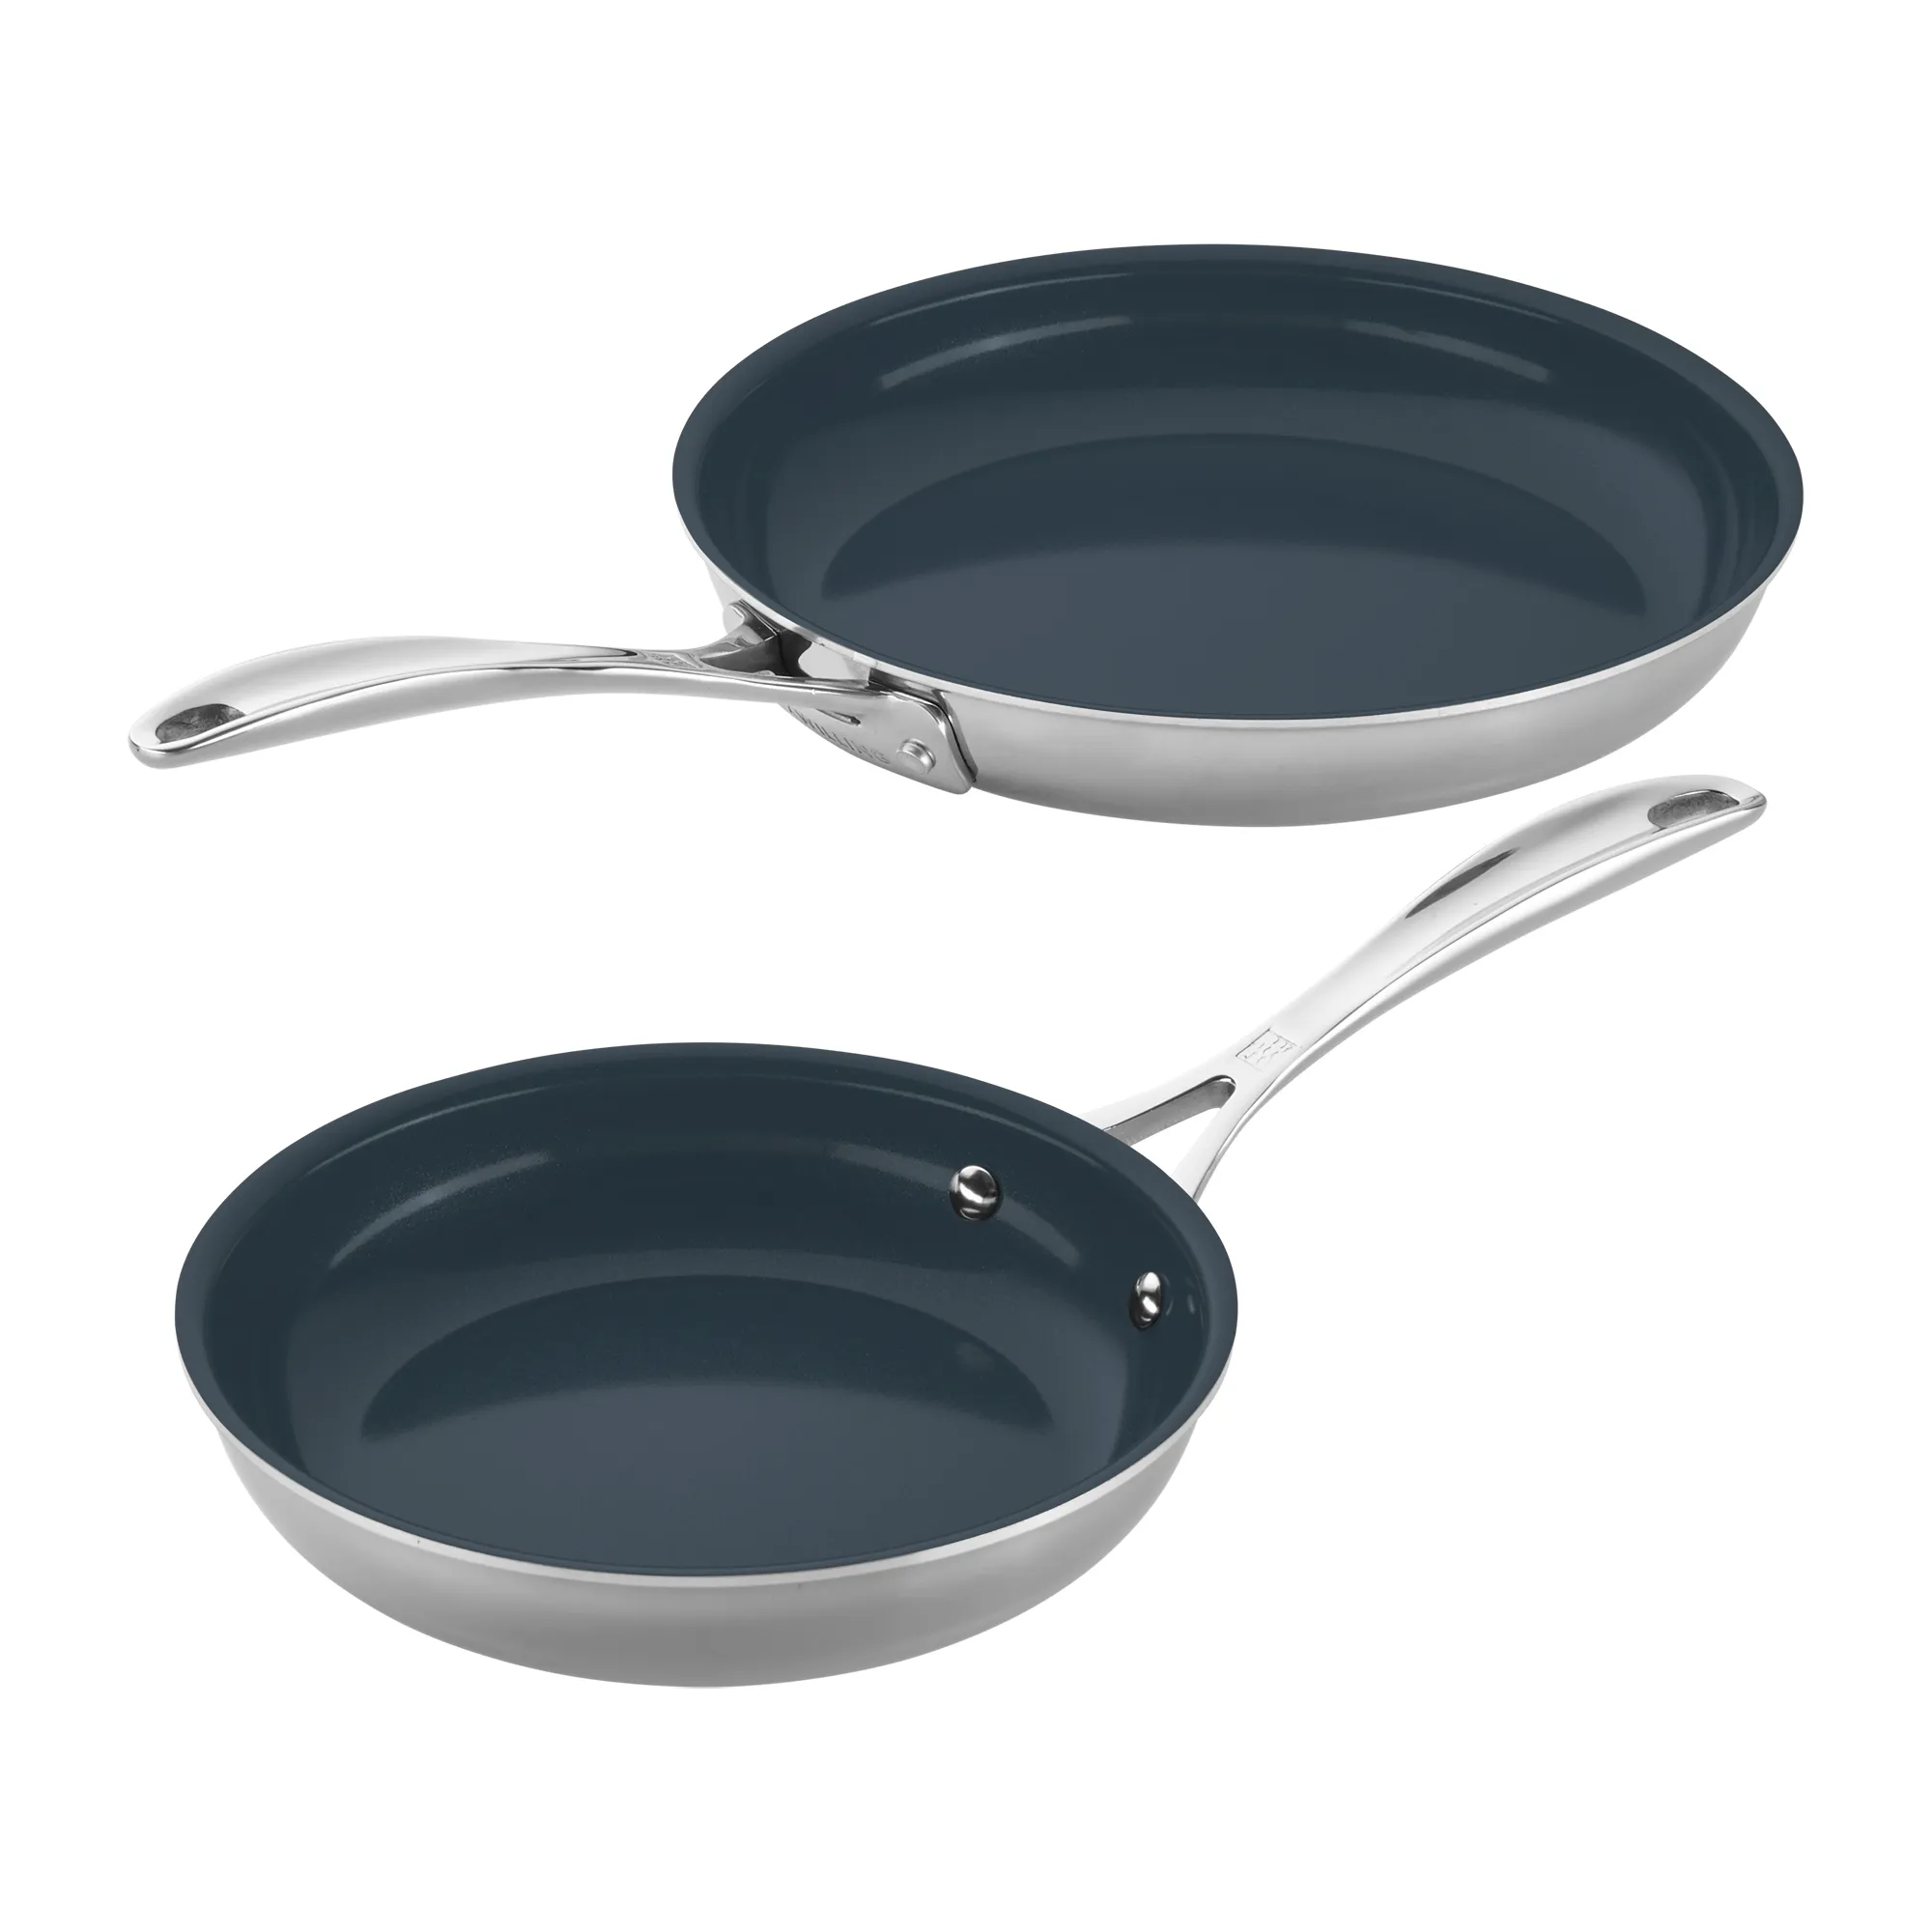 https://www.homethreads.com/files/zwilling/66730-002-zwilling-clad-cfx-2-pc-stainless-steel-ceramic-nonstick-8-in-10-in-fry-pan-set.webp